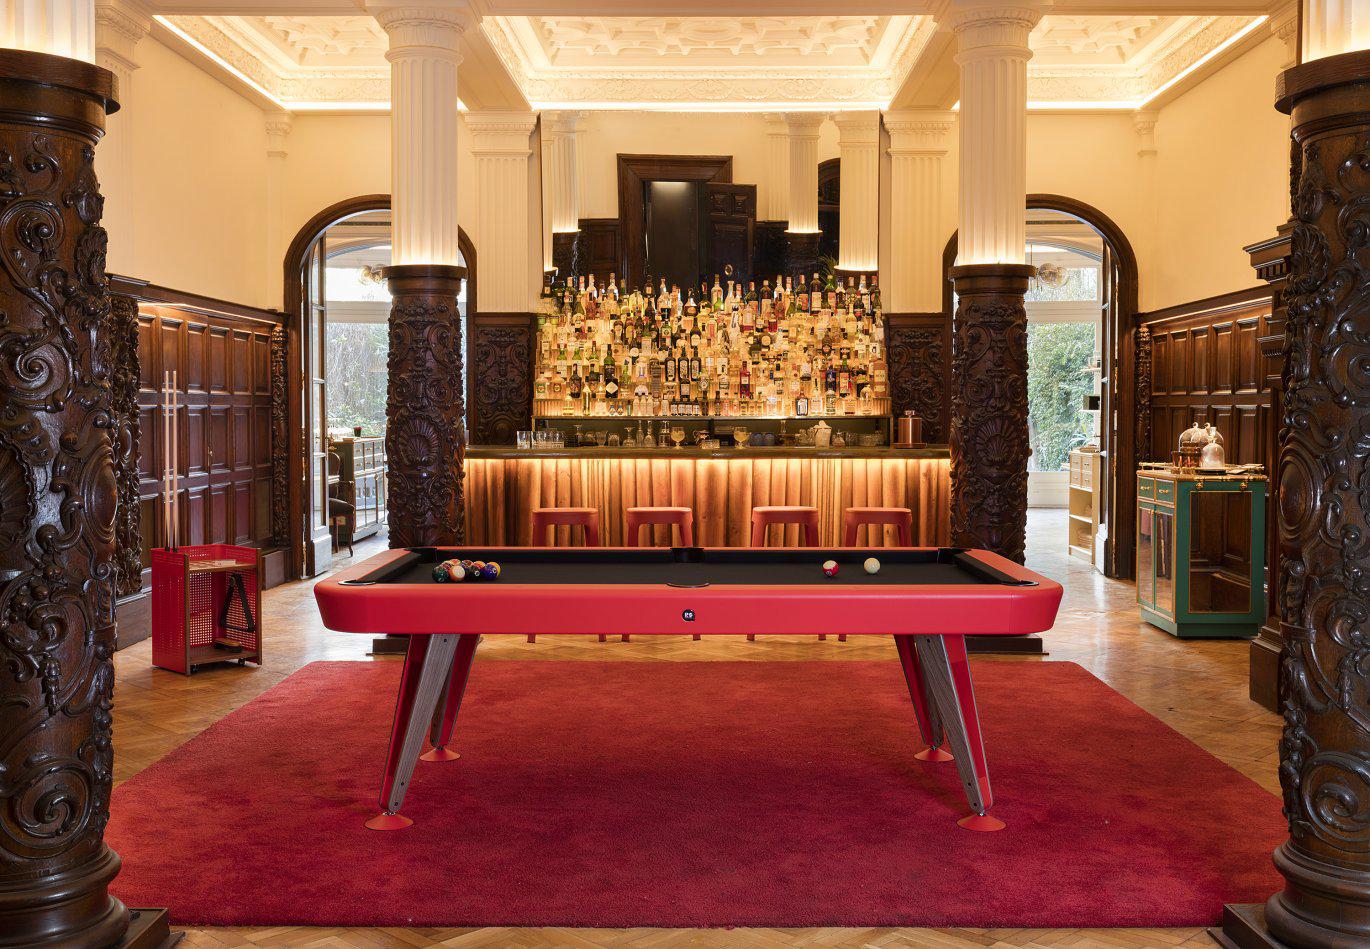 Pool Tables Image